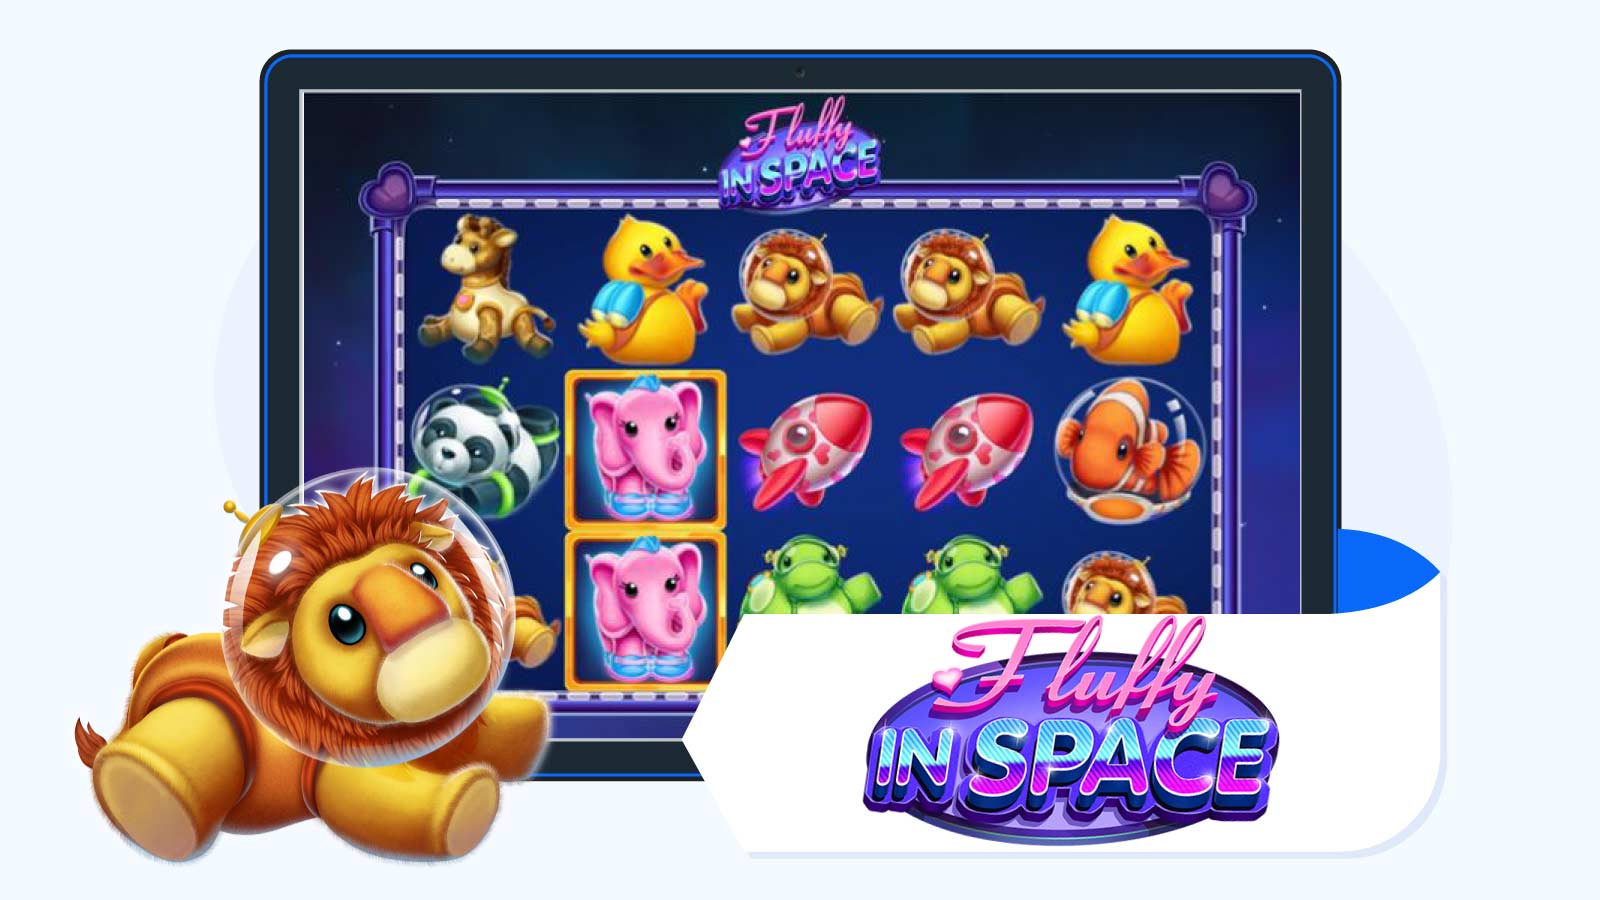 Fluffy in Space Online Pokie Review